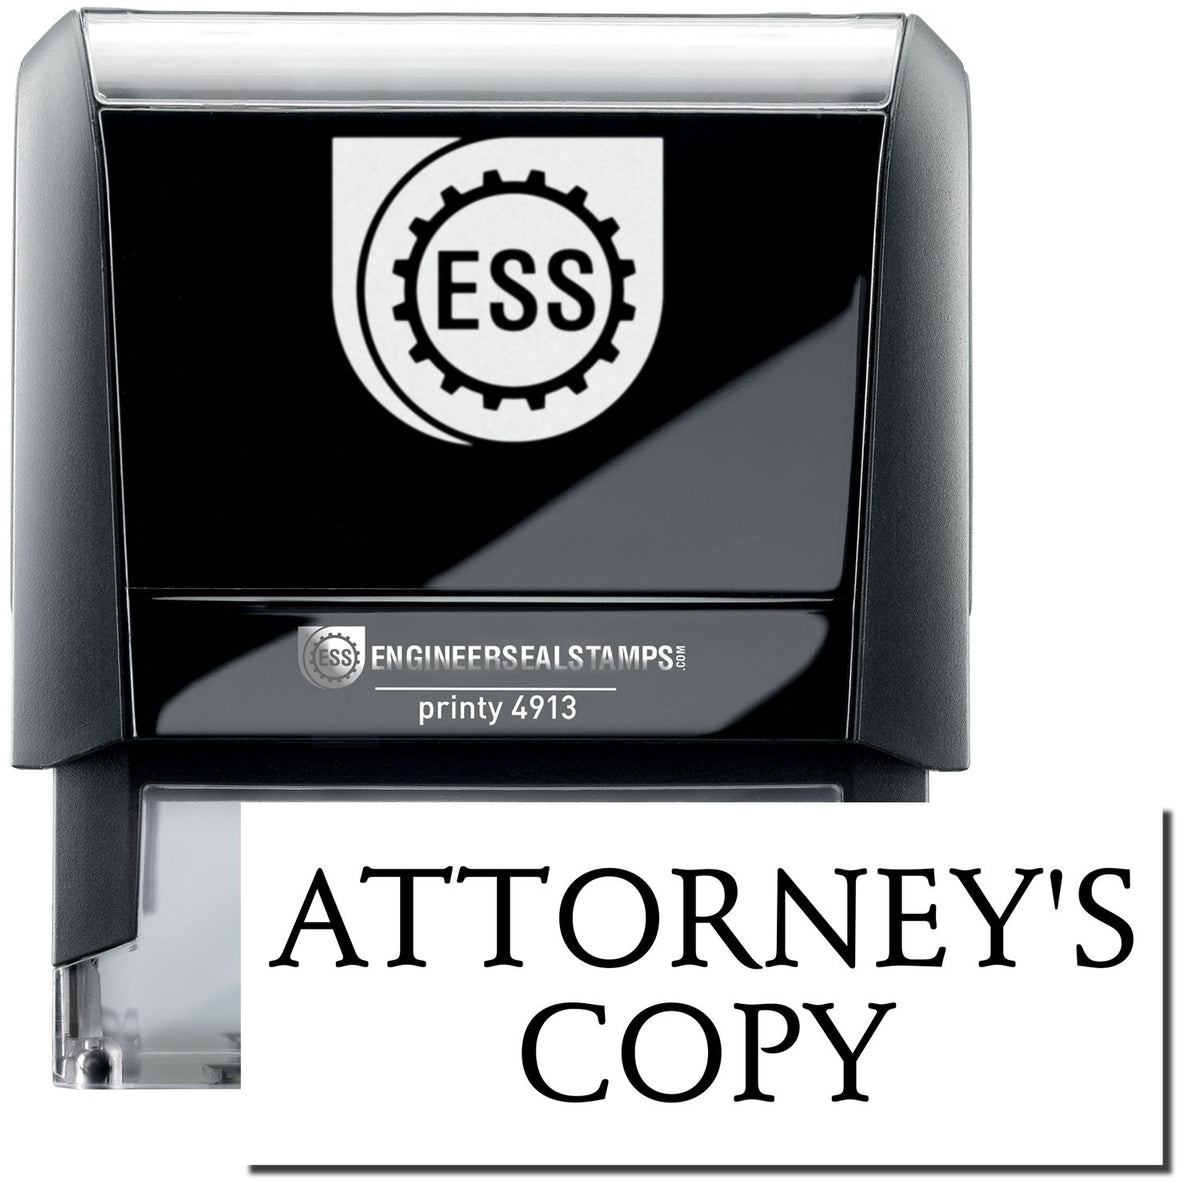 A self-inking stamp with a stamped image showing how the text &quot;ATTORNEY&#39;S COPY&quot; in a large bold font is displayed by it.